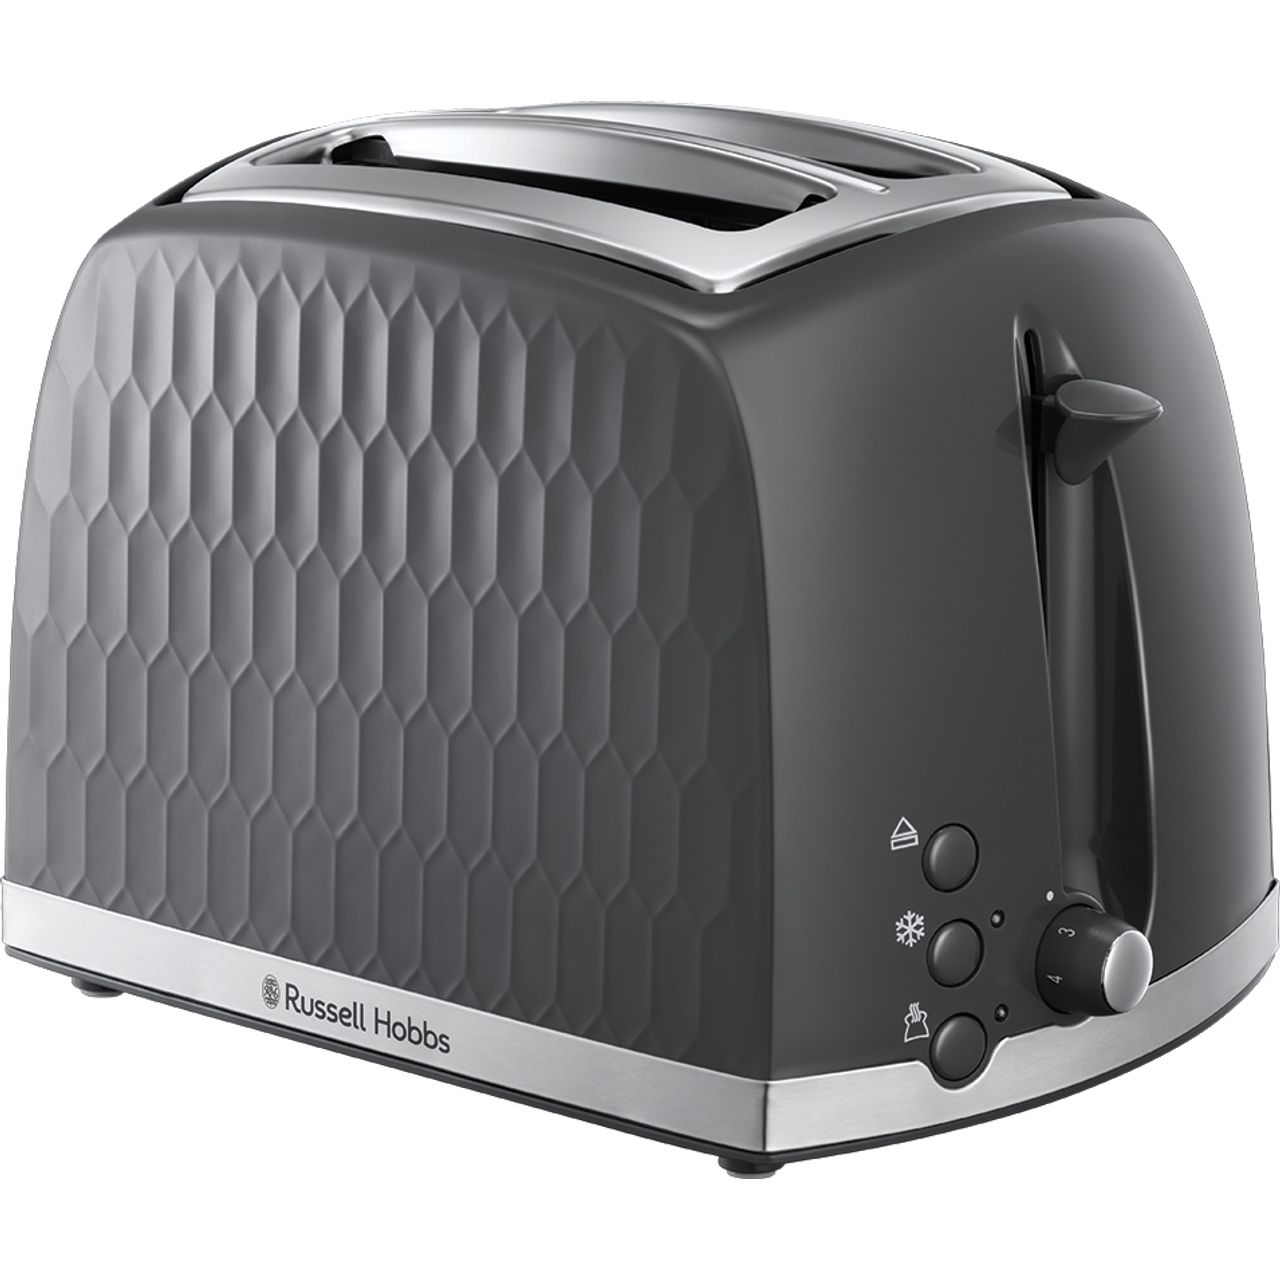 Russell Hobbs 26063 2 Slice Toaster Reviews Updated January